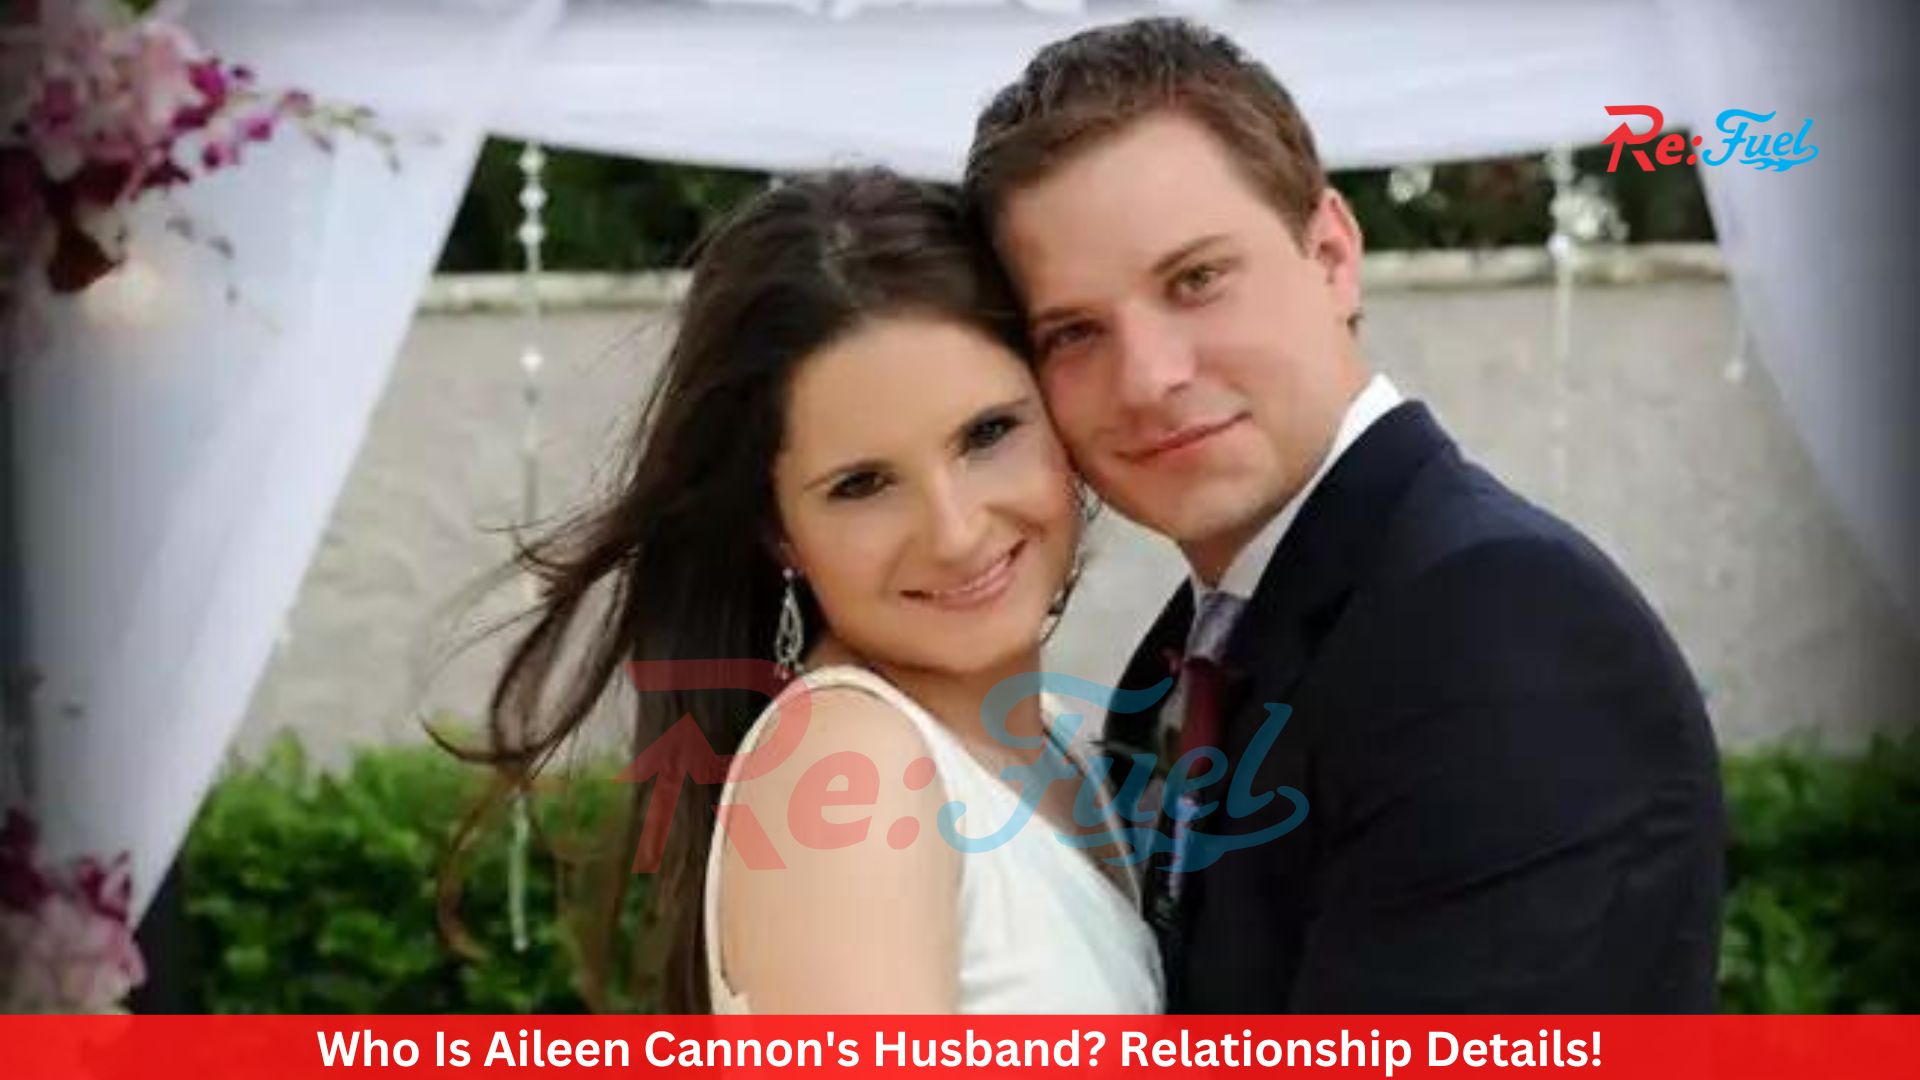 Who Is Aileen Cannon's Husband? Relationship Details!